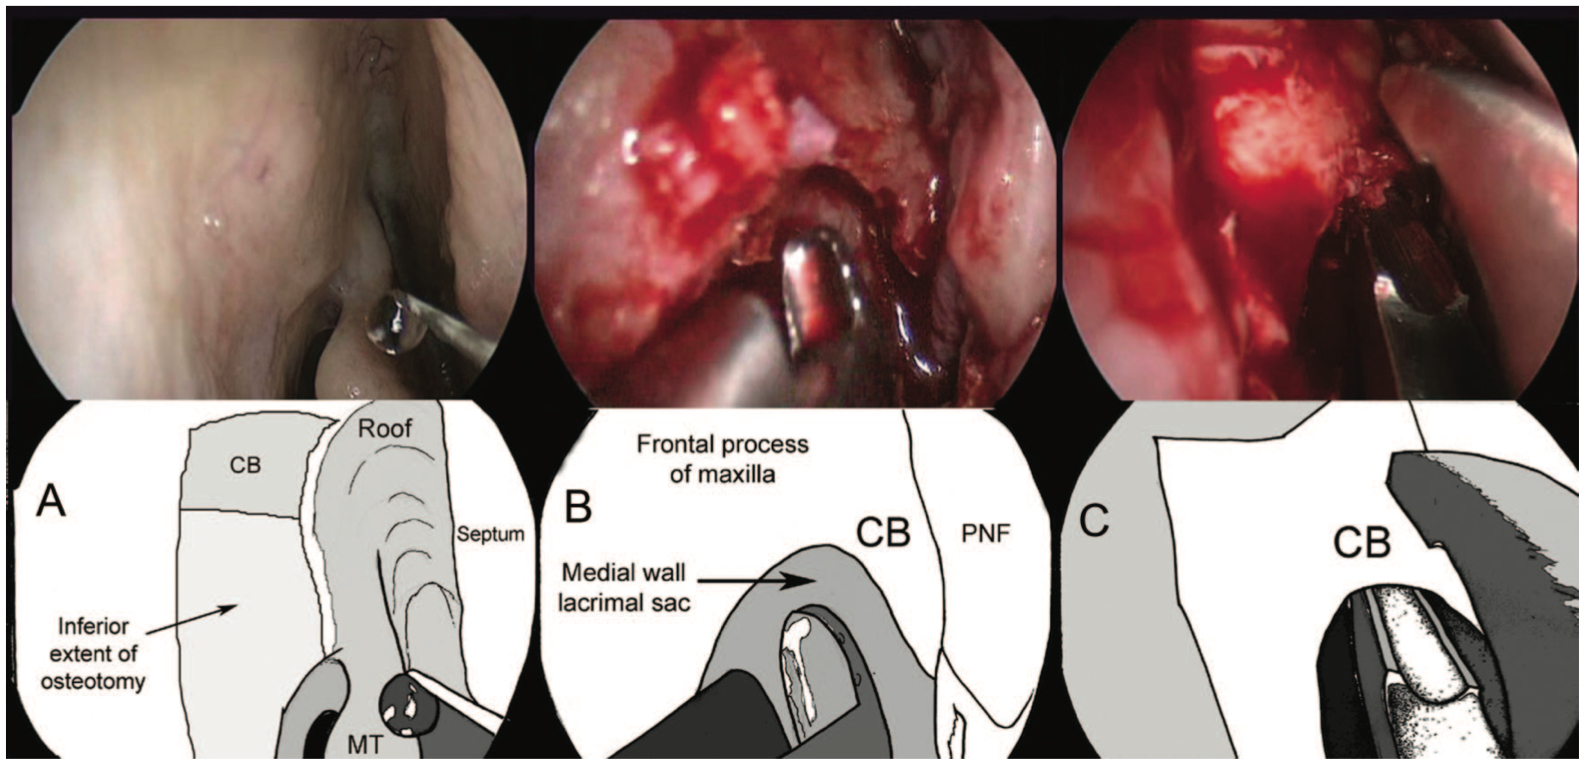 Bony Osteotomy in an Endoscopic Dacryocystorhinostomy: A, The right lateral nasal wall prior to surgery with a schematic illustration showing the underlying position of the osteot-
omy